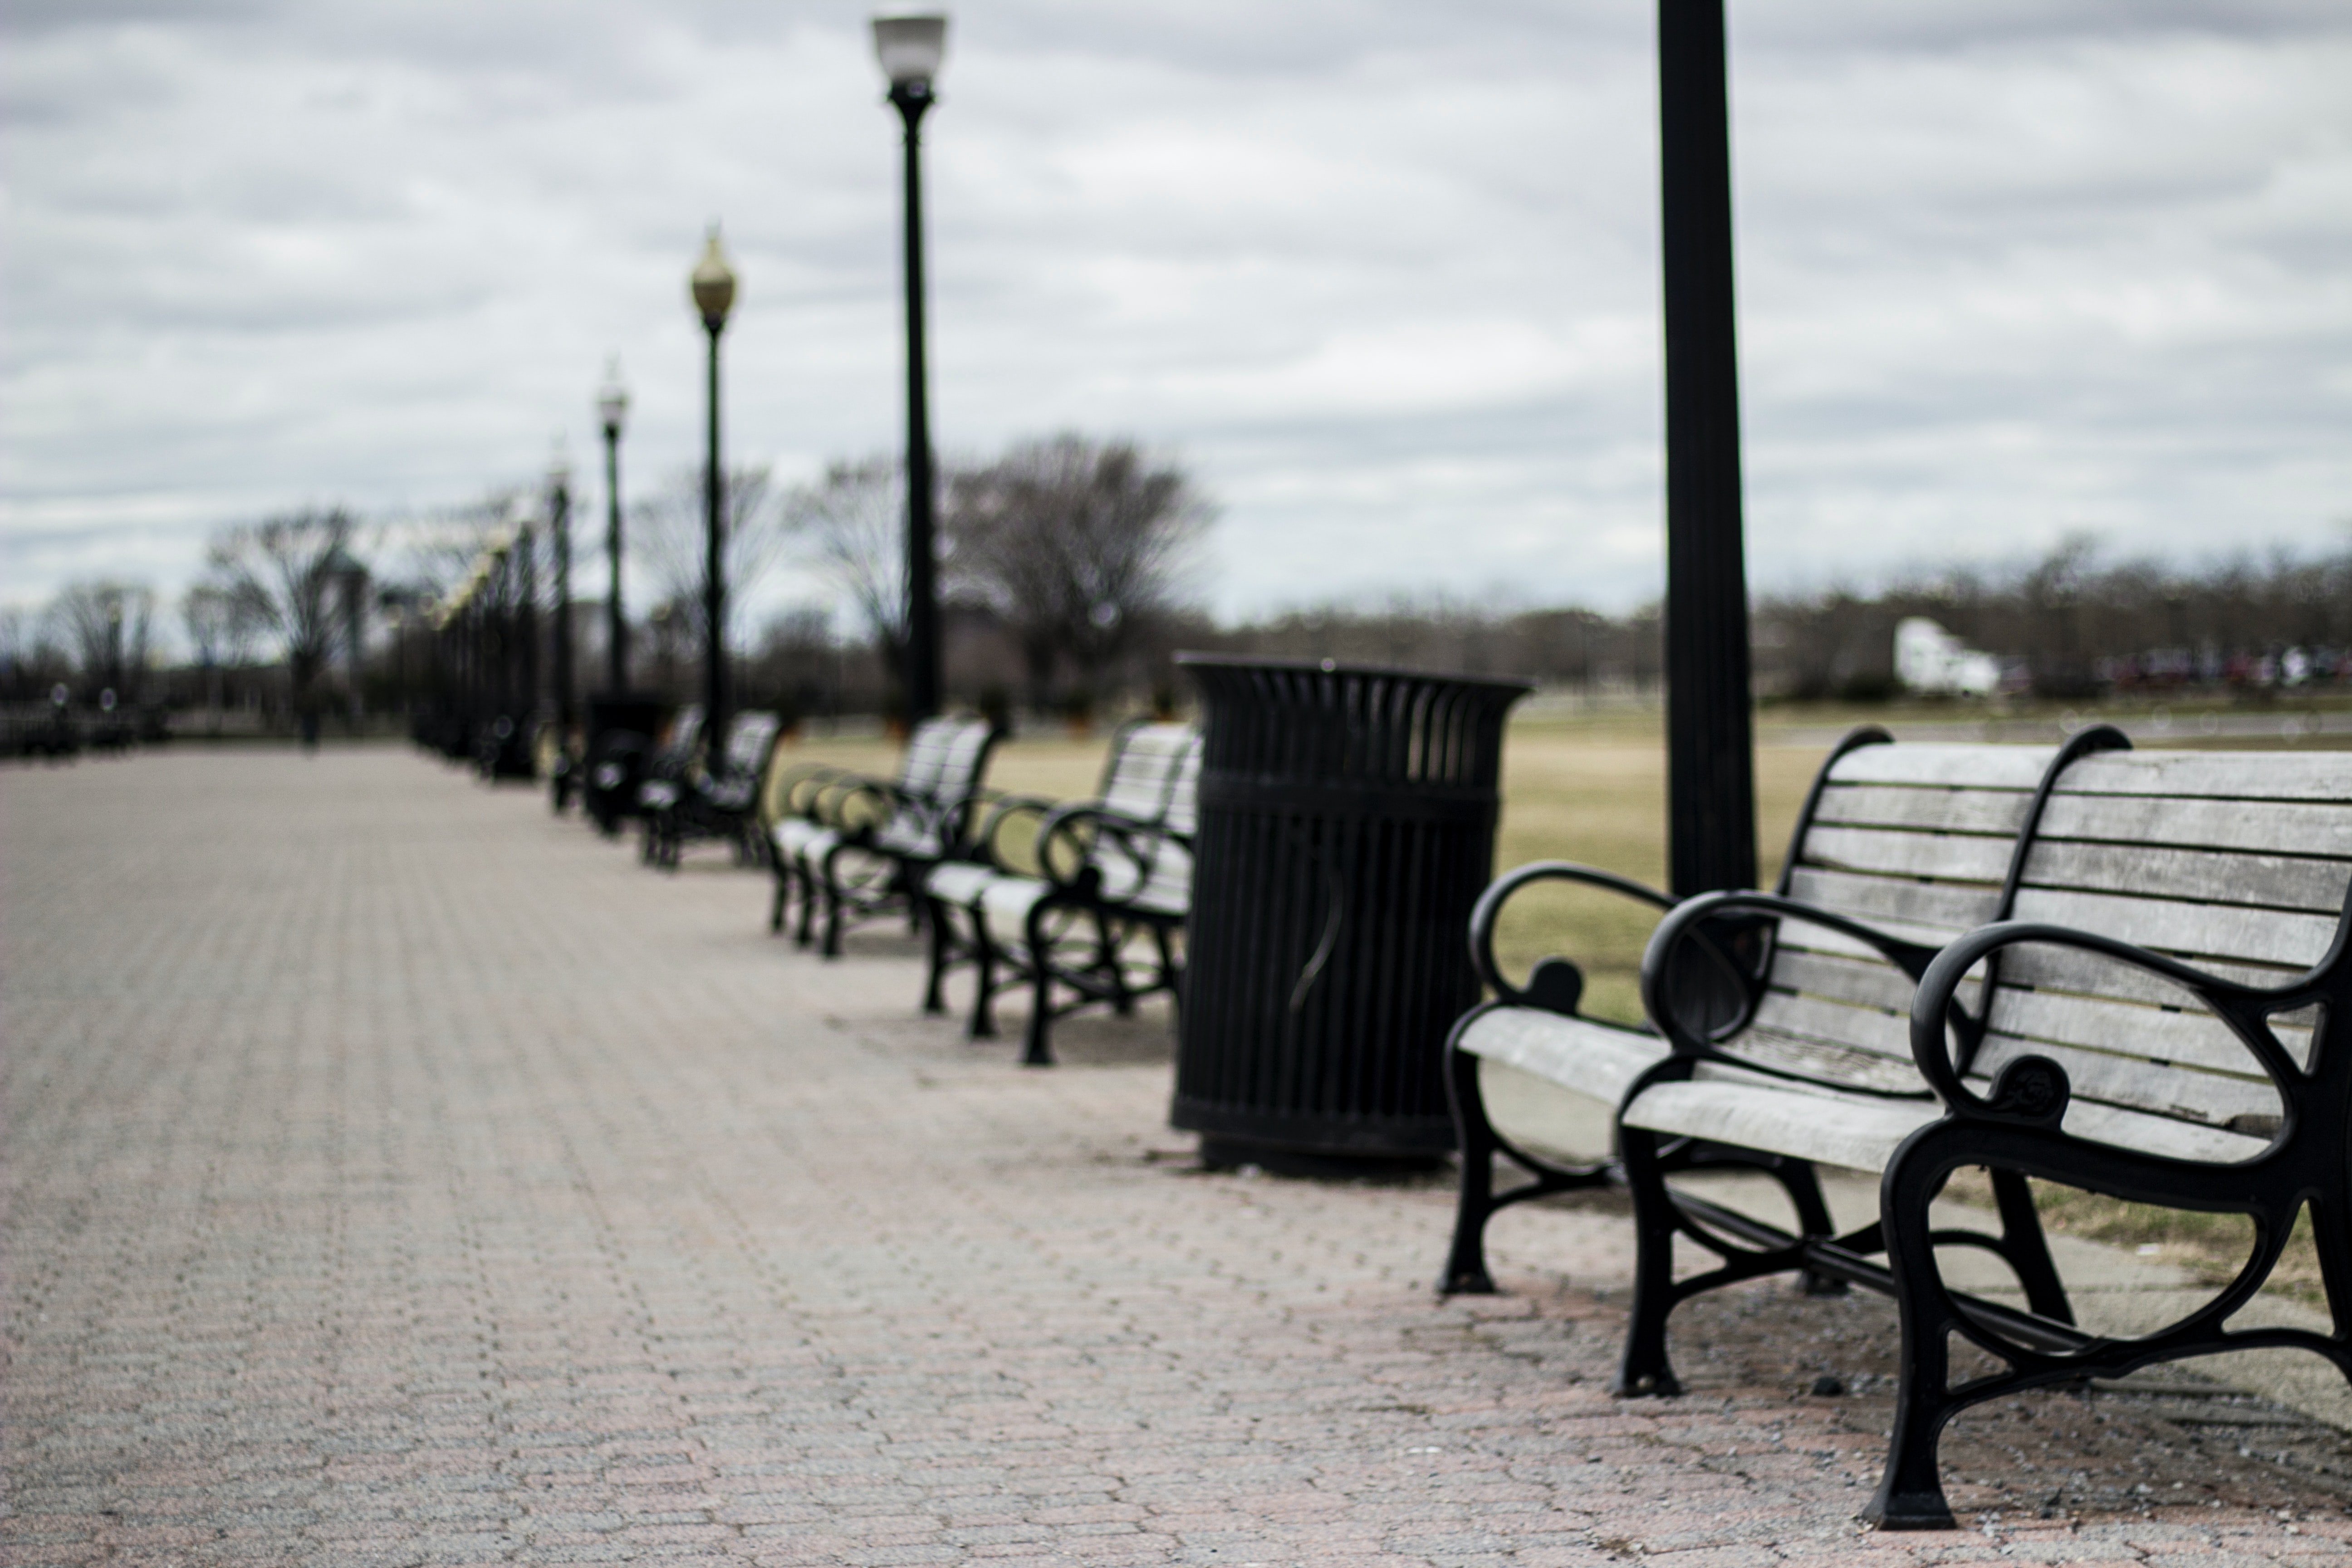 I listened to Annette tell her story while we were seated at a park bench. | Source: Unsplash